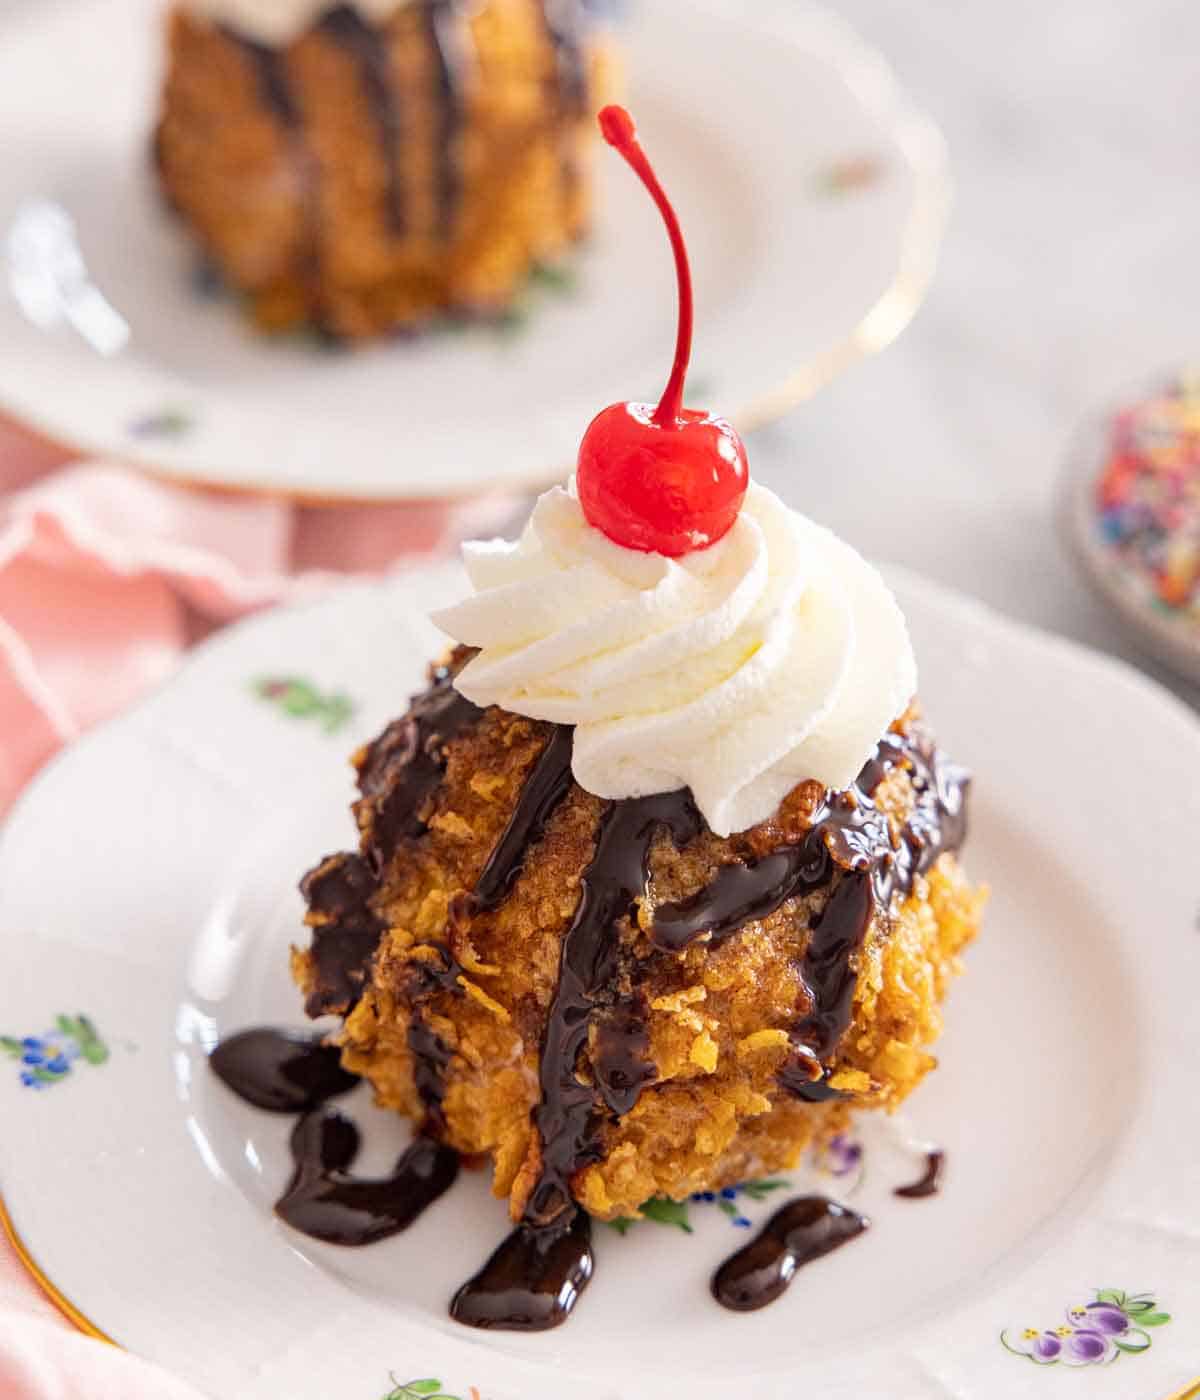 A plate of fried ice cream with chocolate drizzle, whipped cream, and a cherry on top.